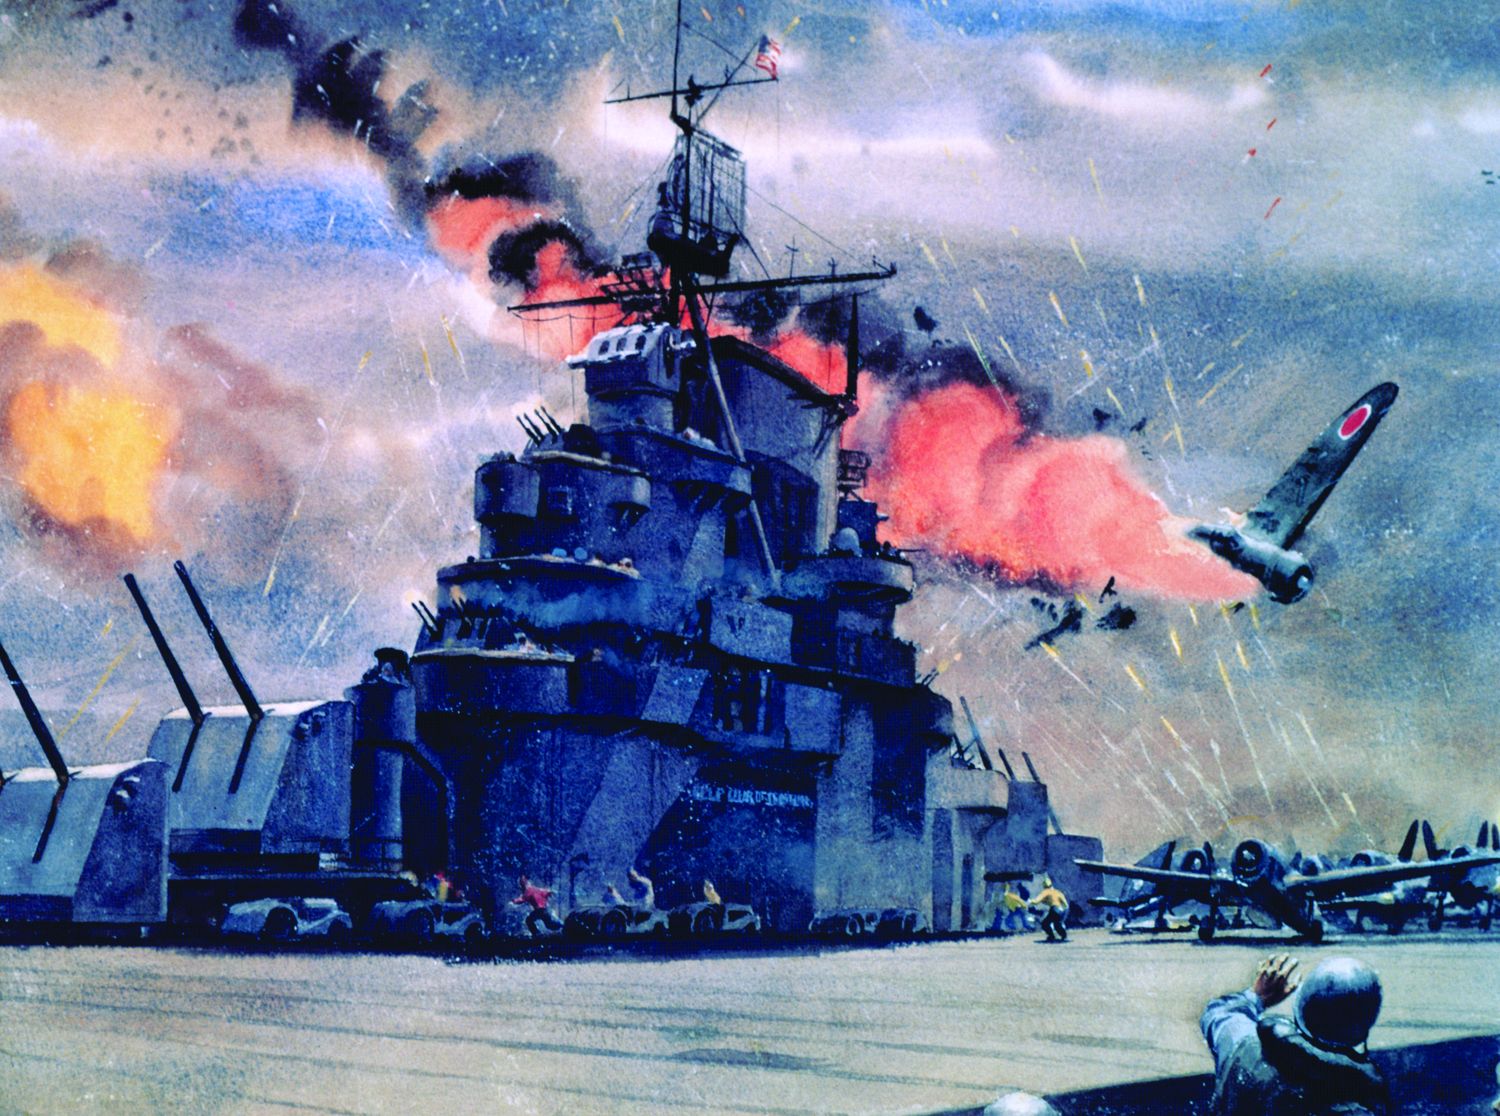 In the painting above by Dwight C. Shepler, a flaming kamikaze descends toward the flight deck of the aircraft carrier USS Bunker Hill. The carrier was hit by two kamikazes on May 11, 1945, off the coast of Okinawa.